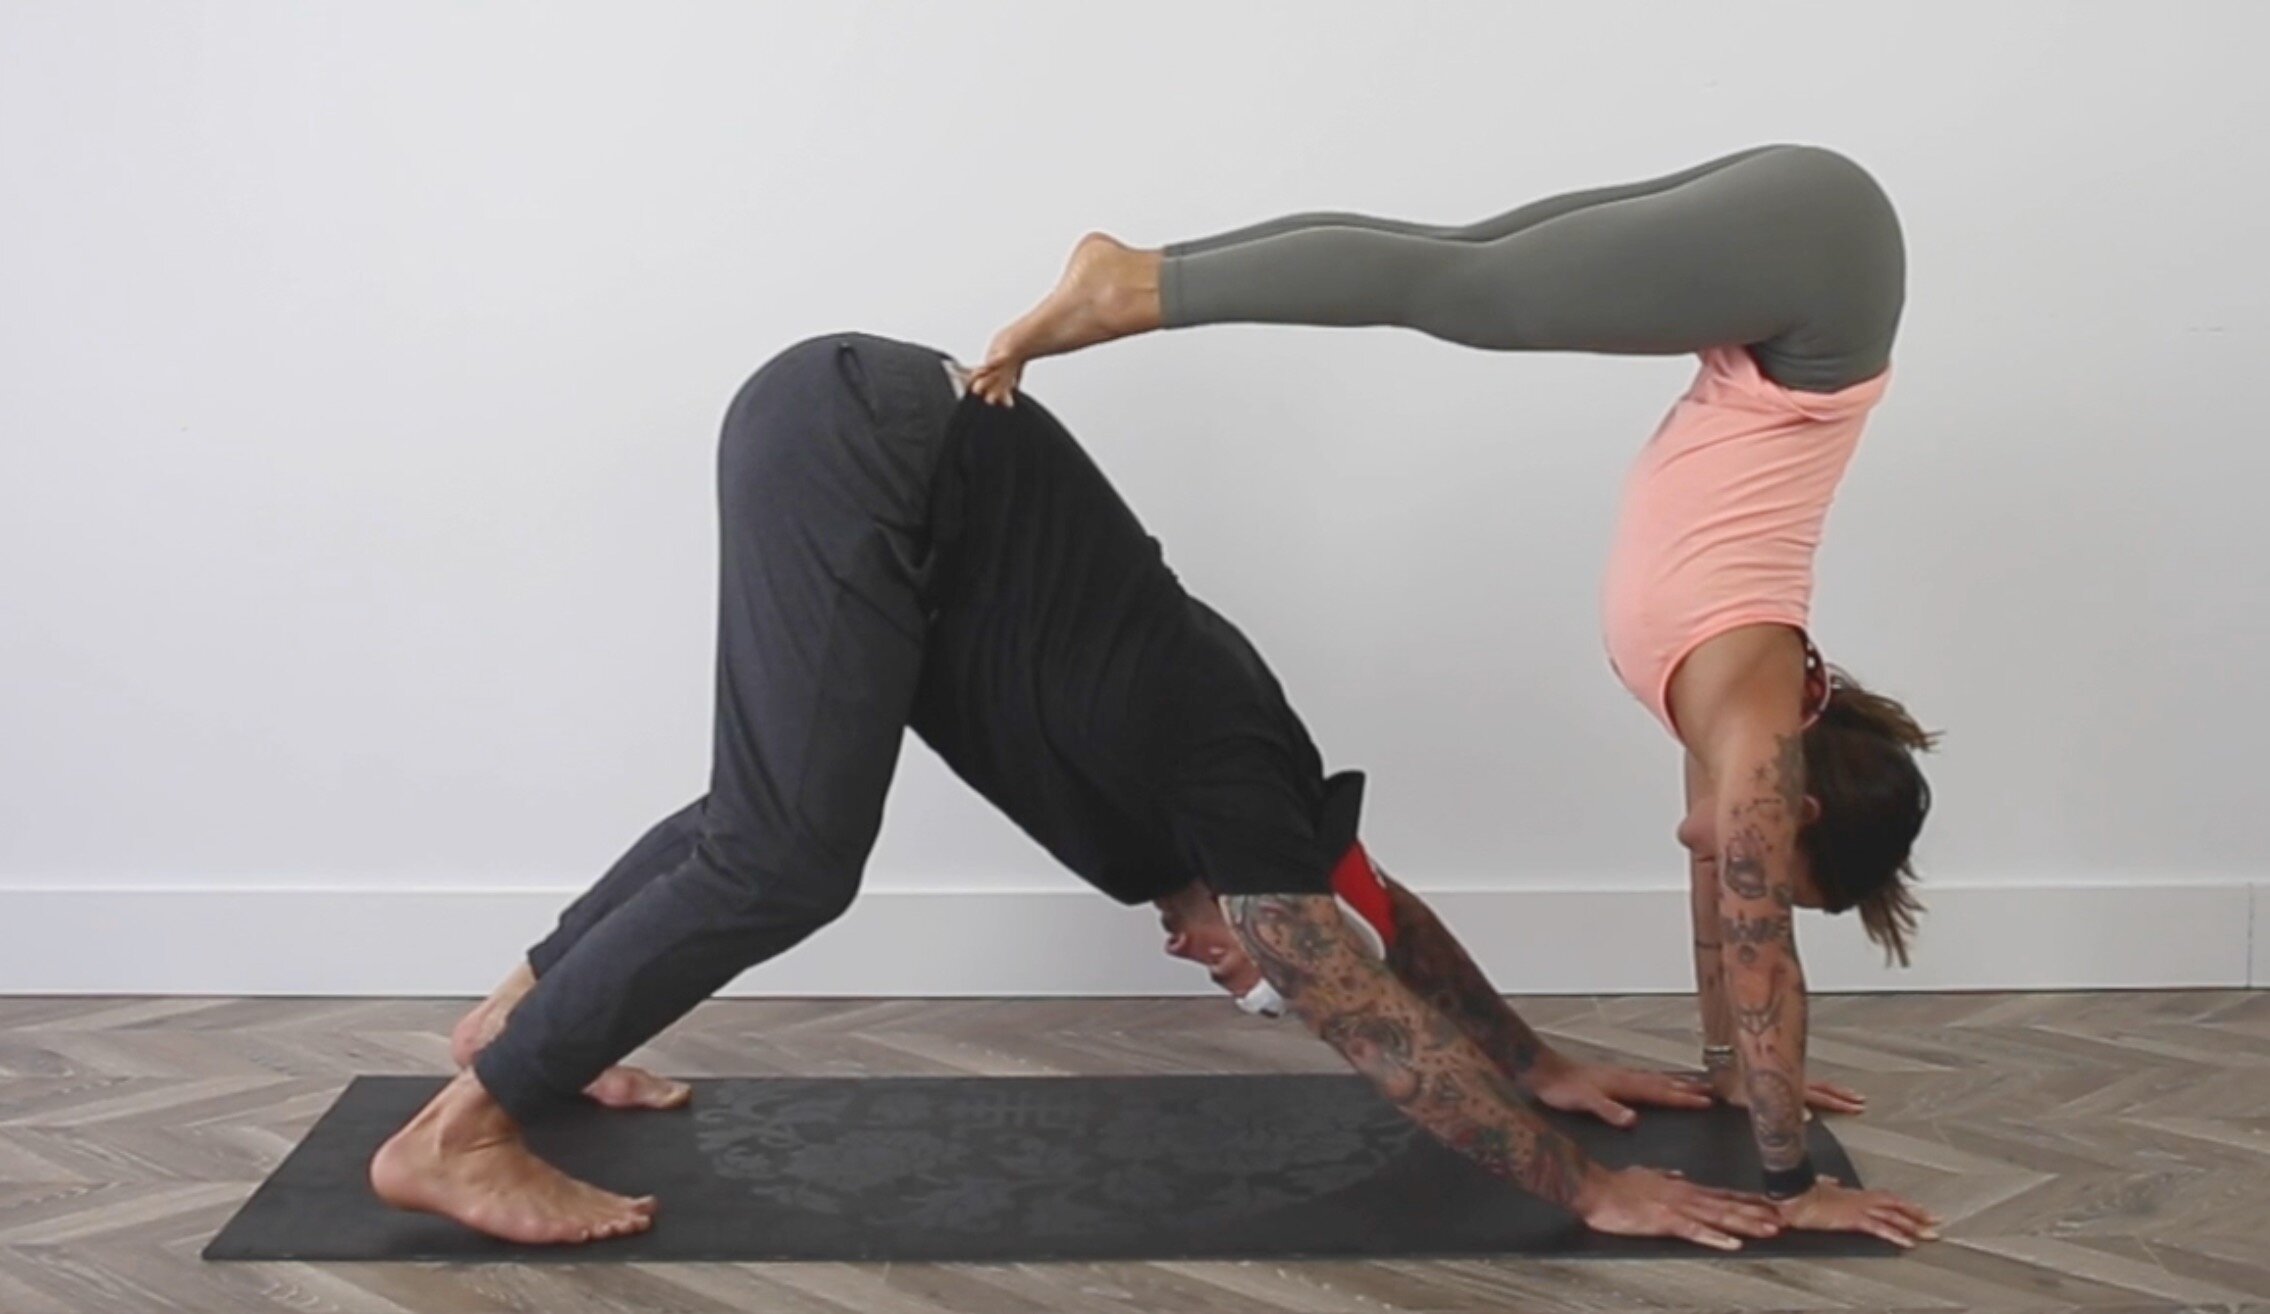 12 Easy Yoga Poses for Two People( Friends, partner or couples Yoga) | Yoga  poses for two, Partner yoga poses, Couples yoga poses